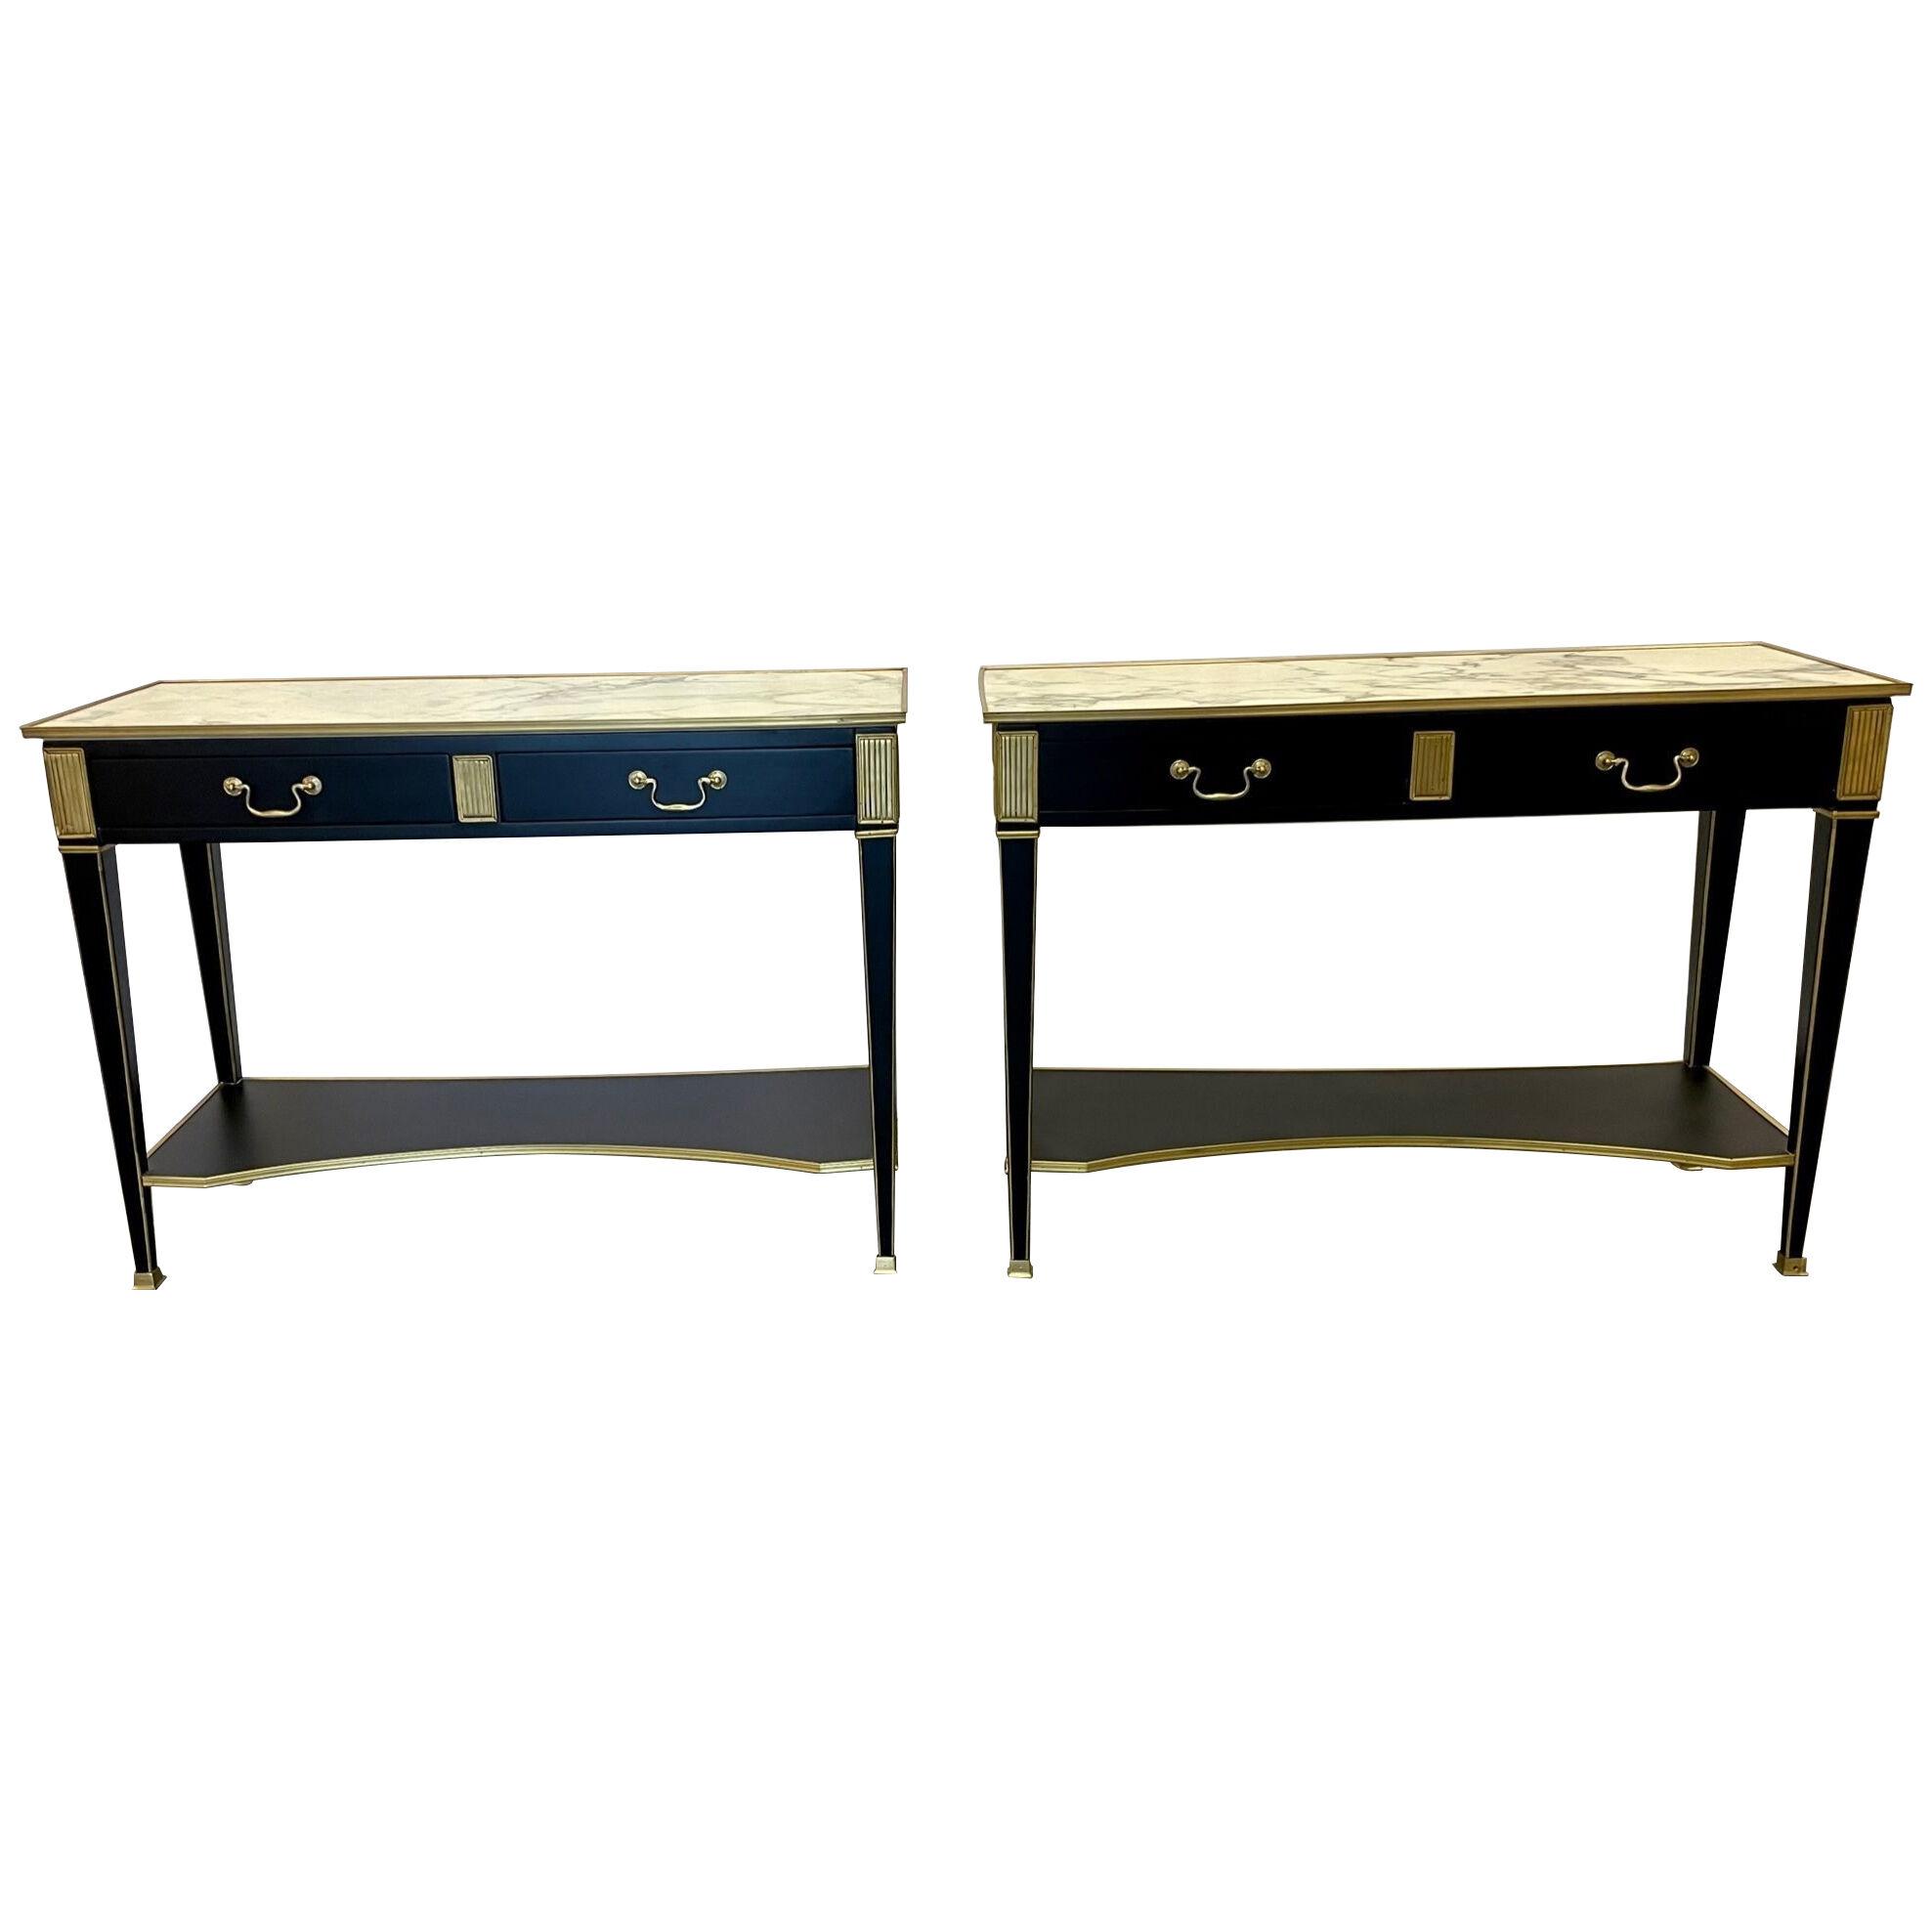 Pair of Hollywood Regency Neoclassical Ebony Console Tables, Manner Jansen